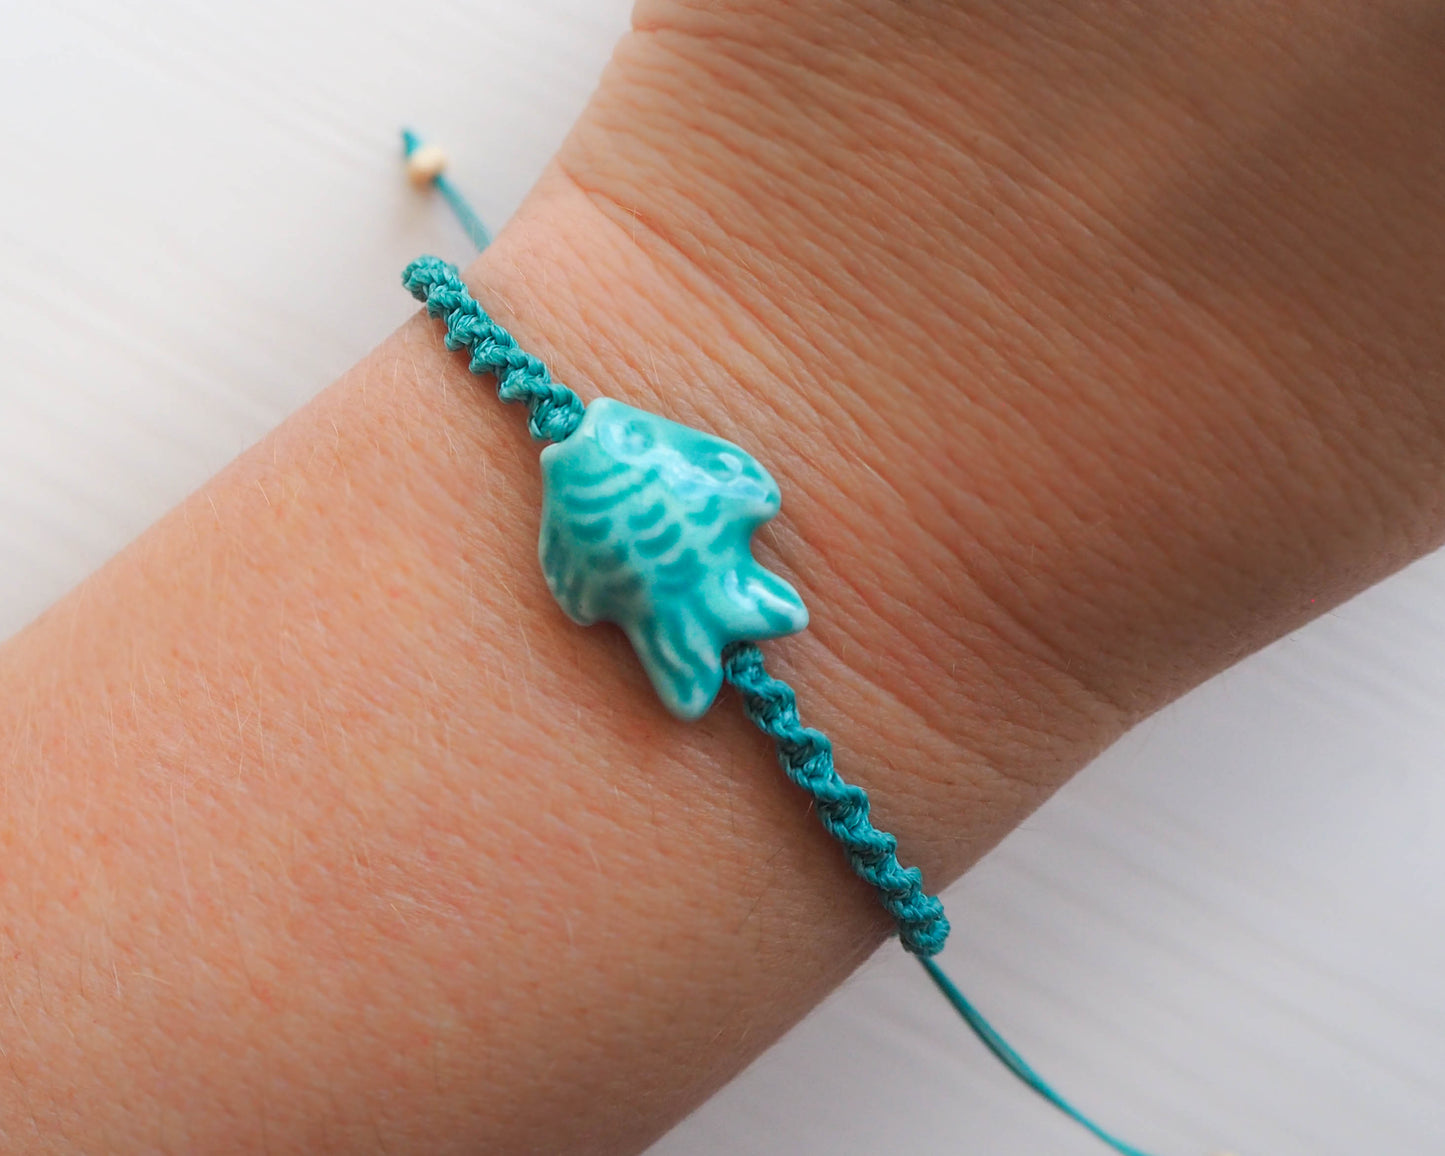 A photo displaying the entire Fish Bracelet, elegantly worn on a wrist. The bracelet adds a touch of marine-inspired sophistication to the outfit, Seabylou, Ceramic Fish bracelet, Turquoise green ocean bracelet, braided bracelet